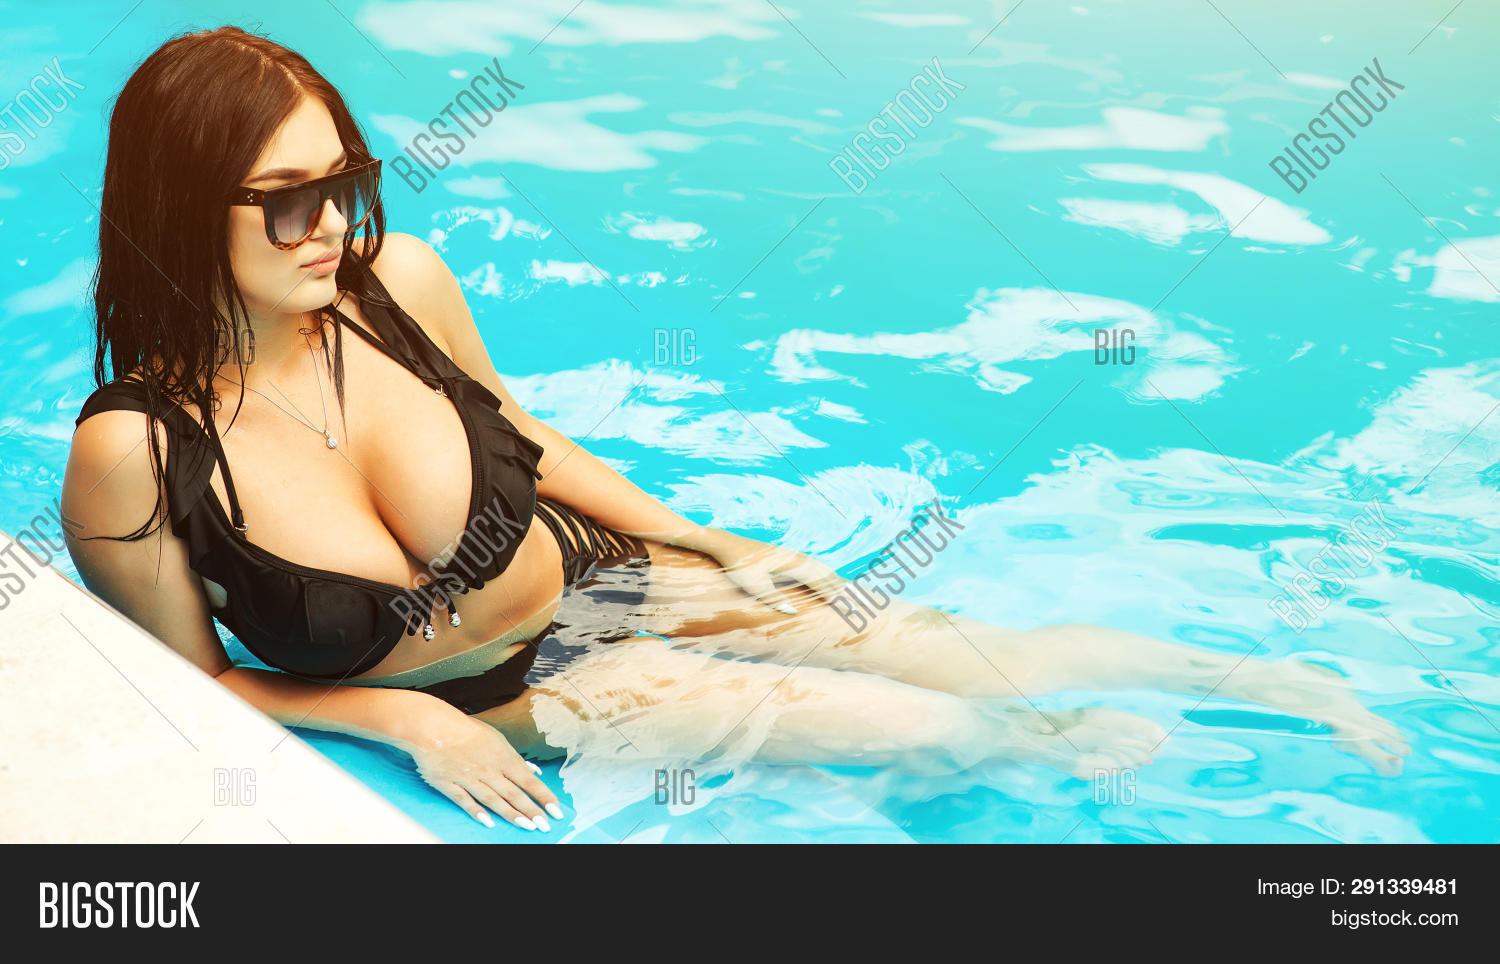 Best of Big boobs by pool